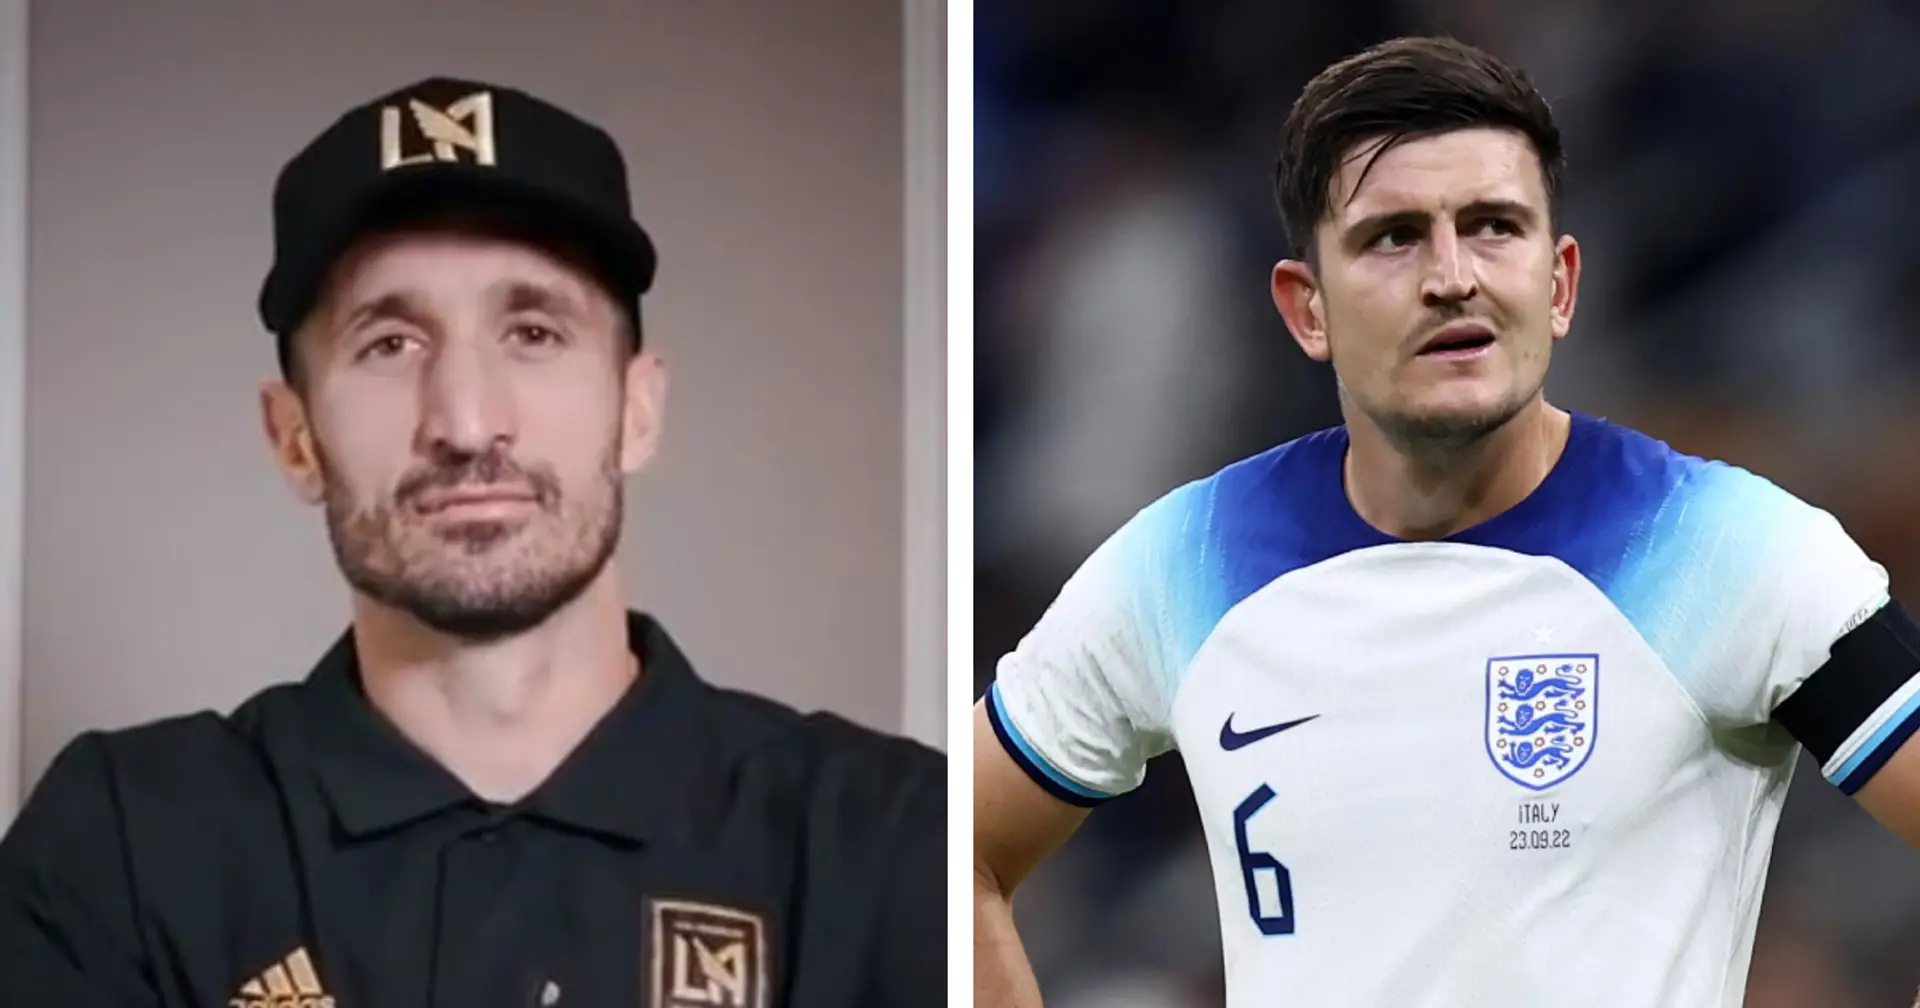 Giorgio Chiellini: 'Man United require too much of Harry Maguire. English players are pressured by media and fans'